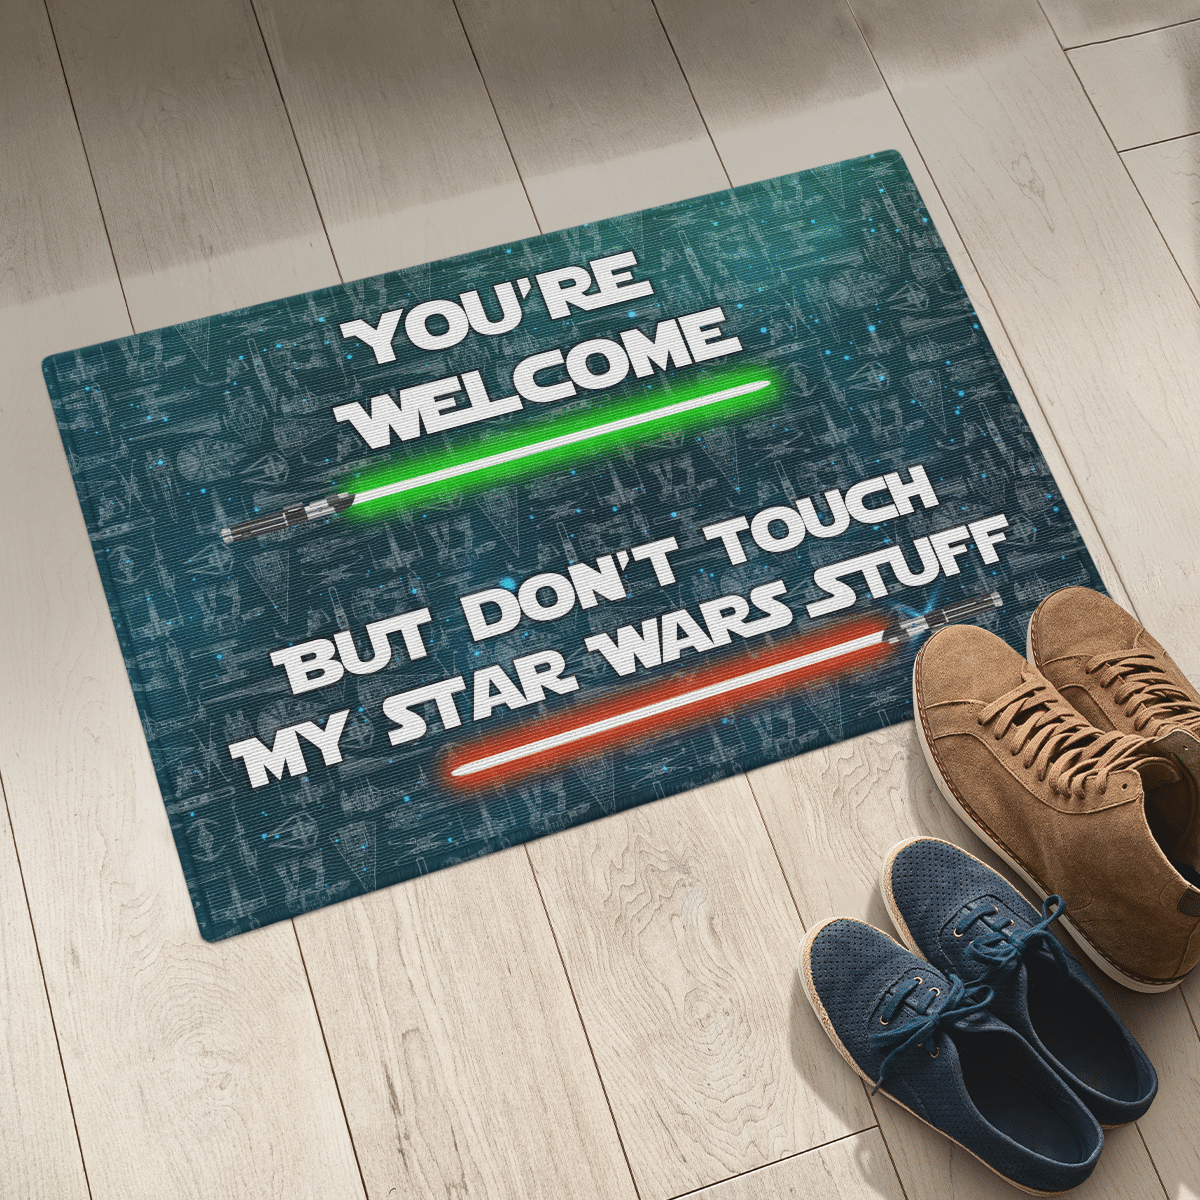 Star war Your welcome but dont touch my star wars stuff doormat – LIMITED EDITION